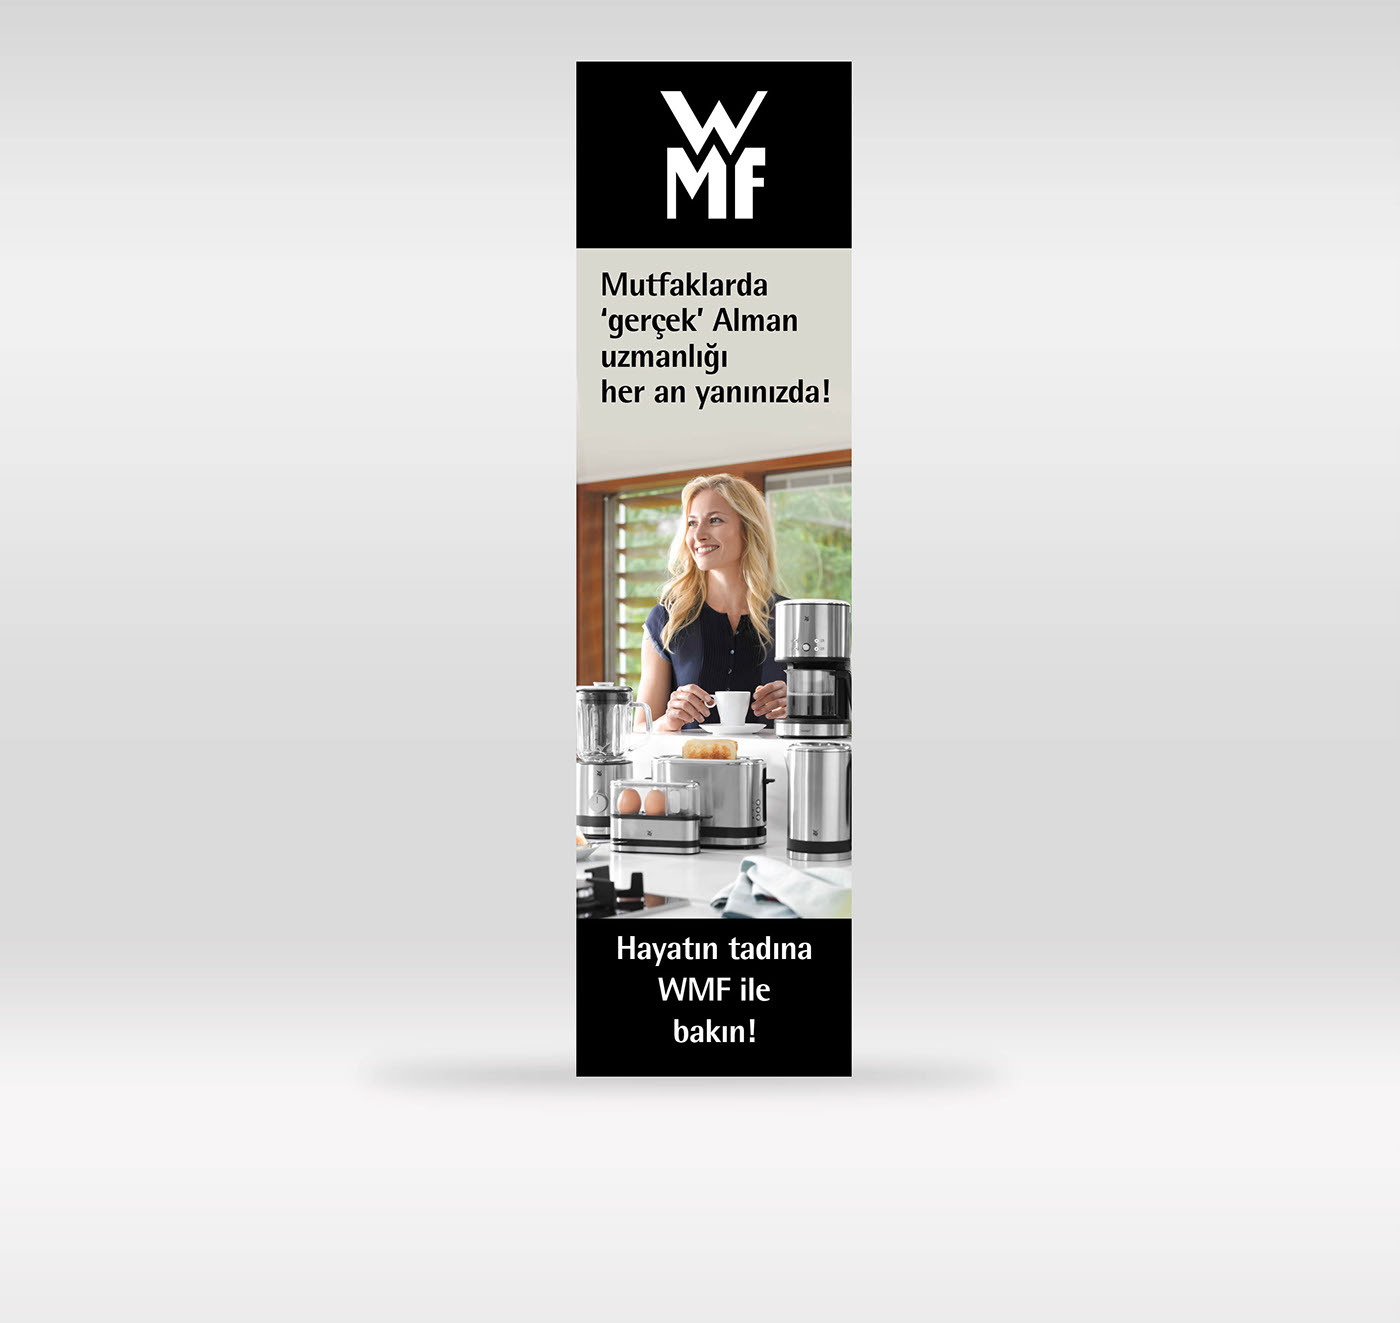 Shopping WMF breville sale brand poster